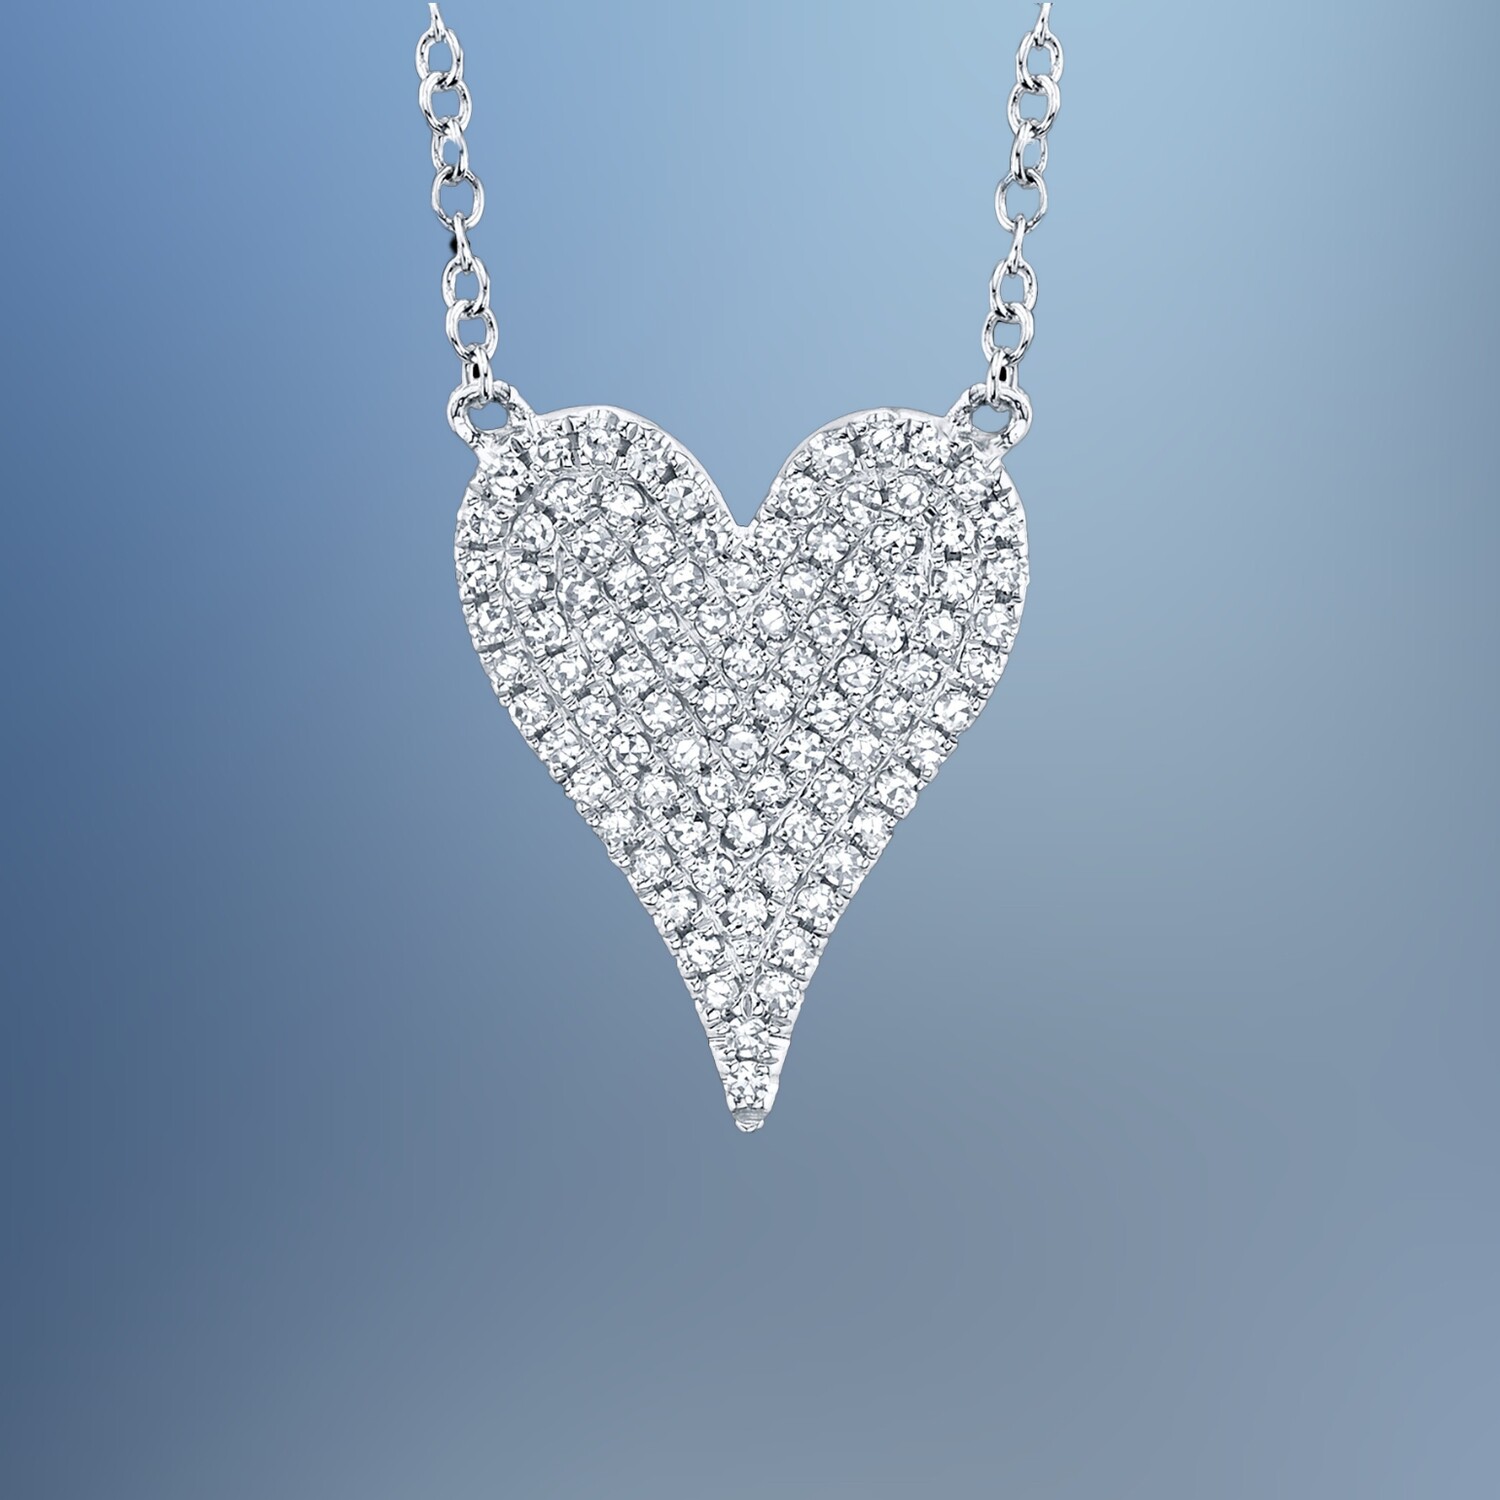 14KT WHITE GOLD DIAMOND PAVÉ HEART NECKLACE FEATURING 57 ROUND BRILLIANT CUT DIAMONDS TOTALING 0.11 CTS